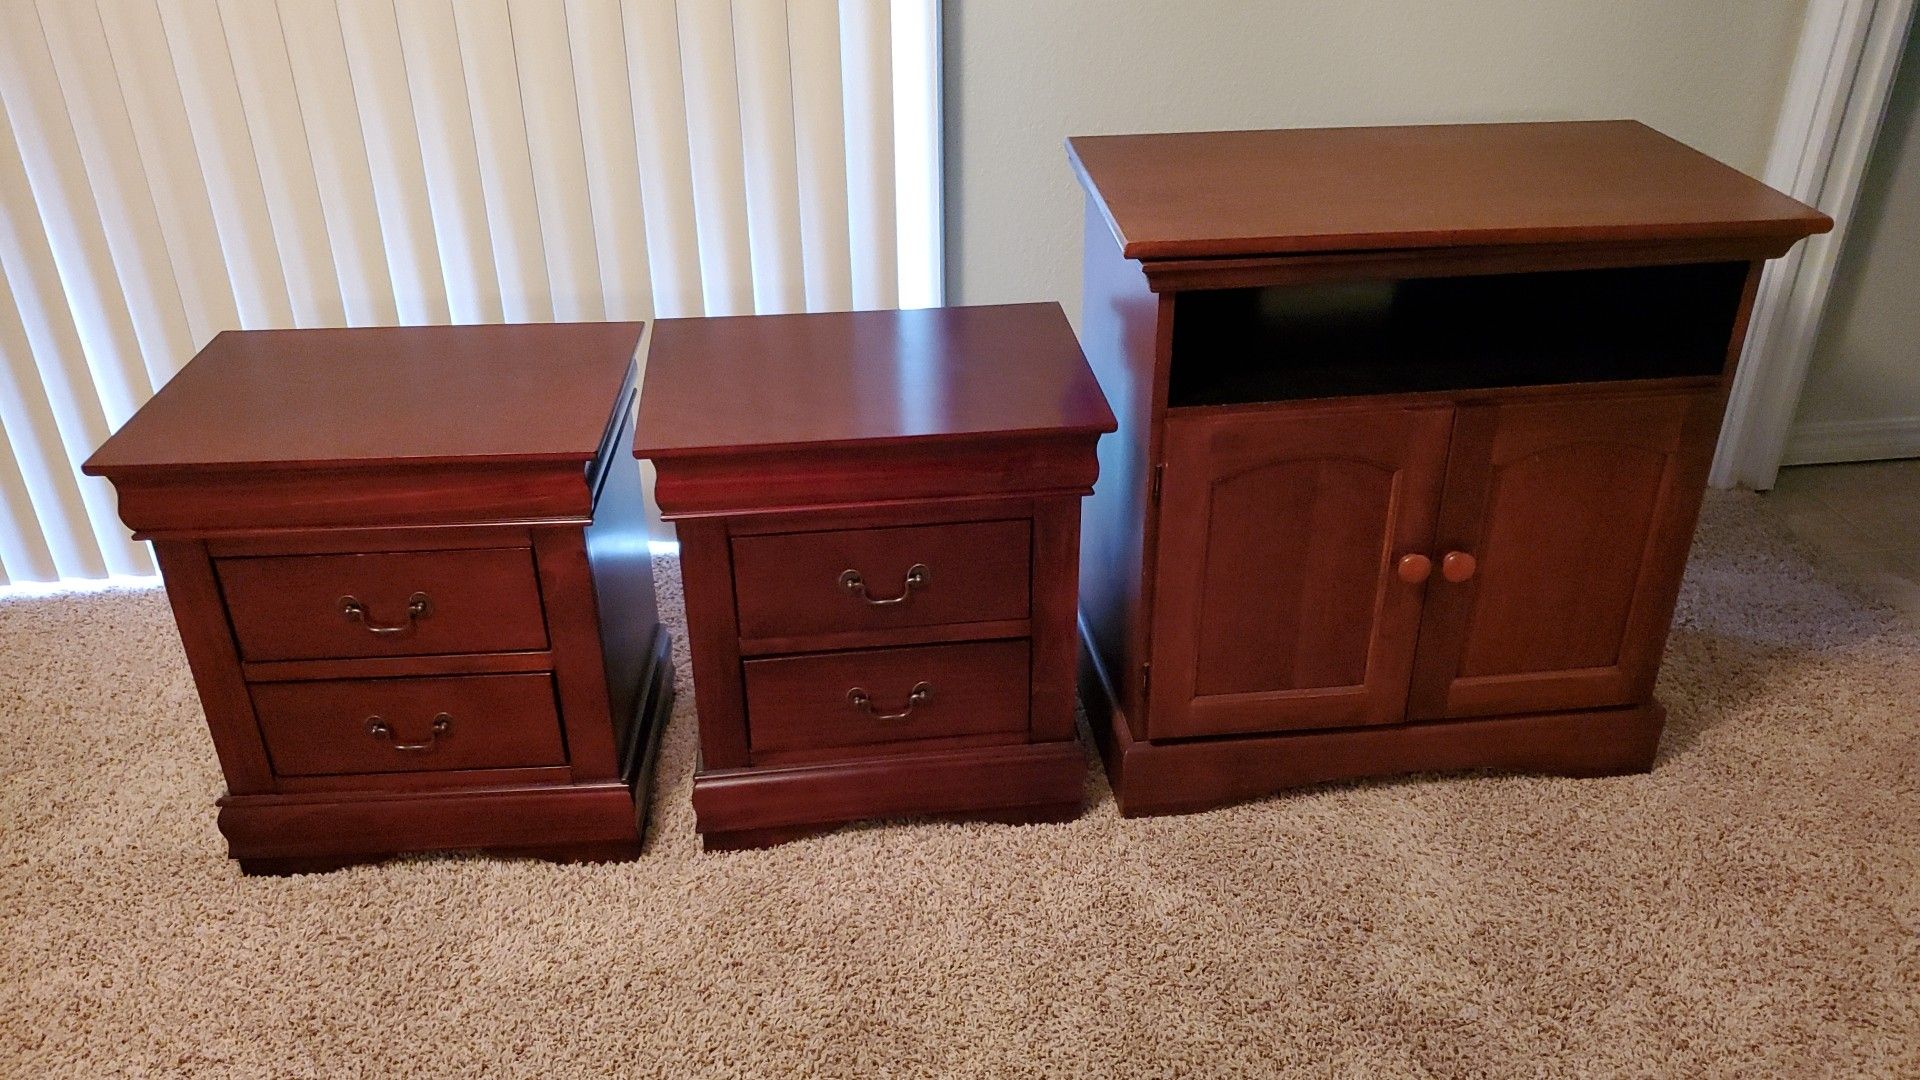 TV stand and 2 night stands. Cherry finish.